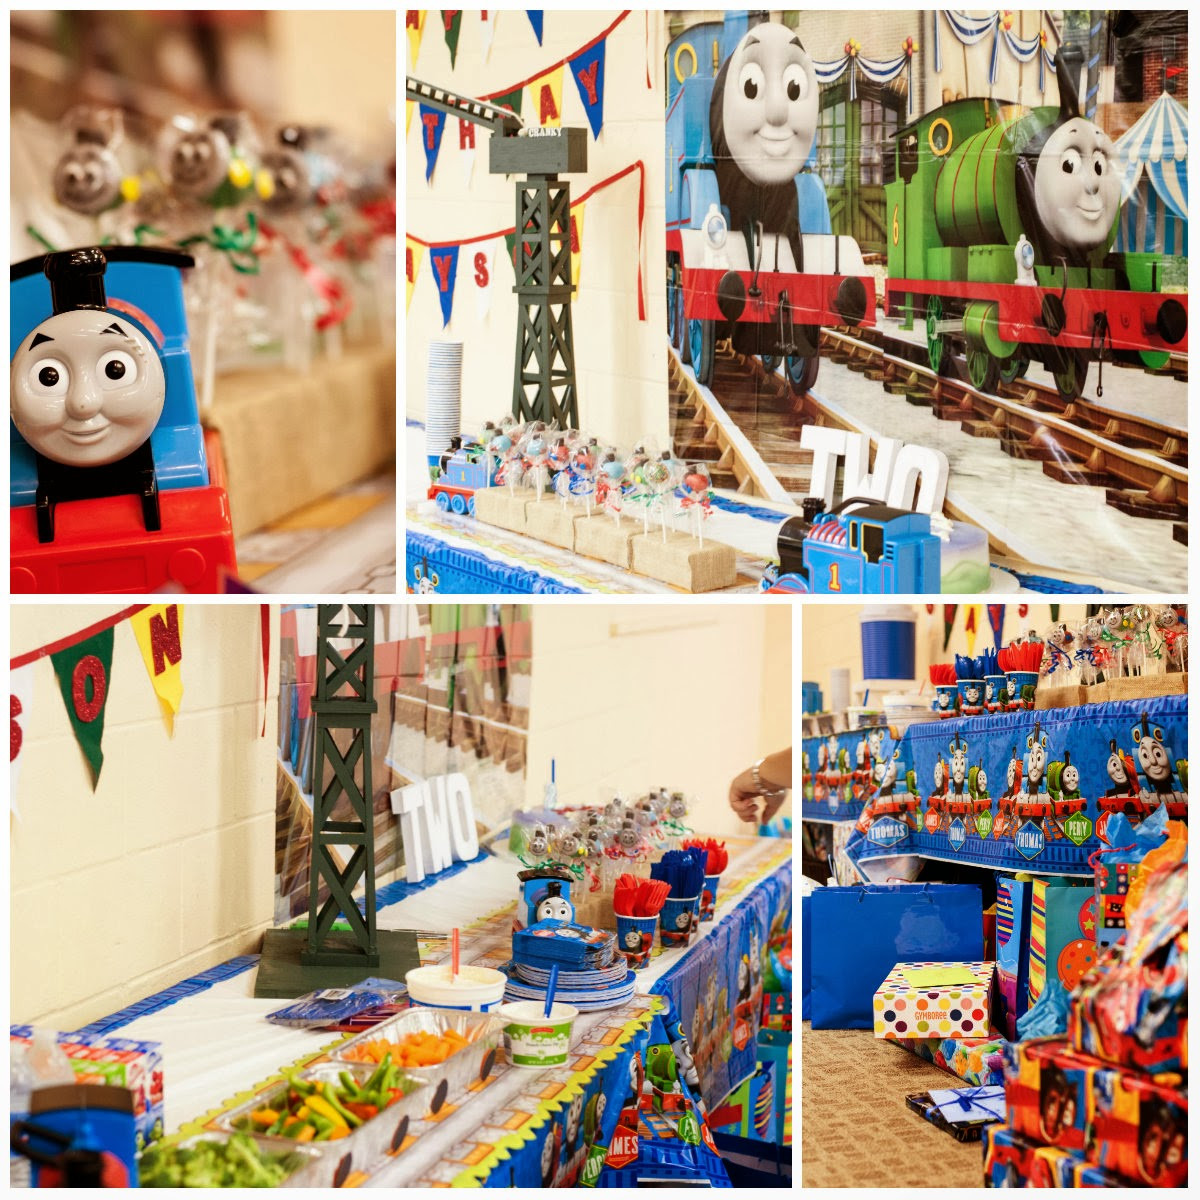 Thomas The Train Birthday Decorations
 In this Crazy Life Thomas the Train Birthday Party The